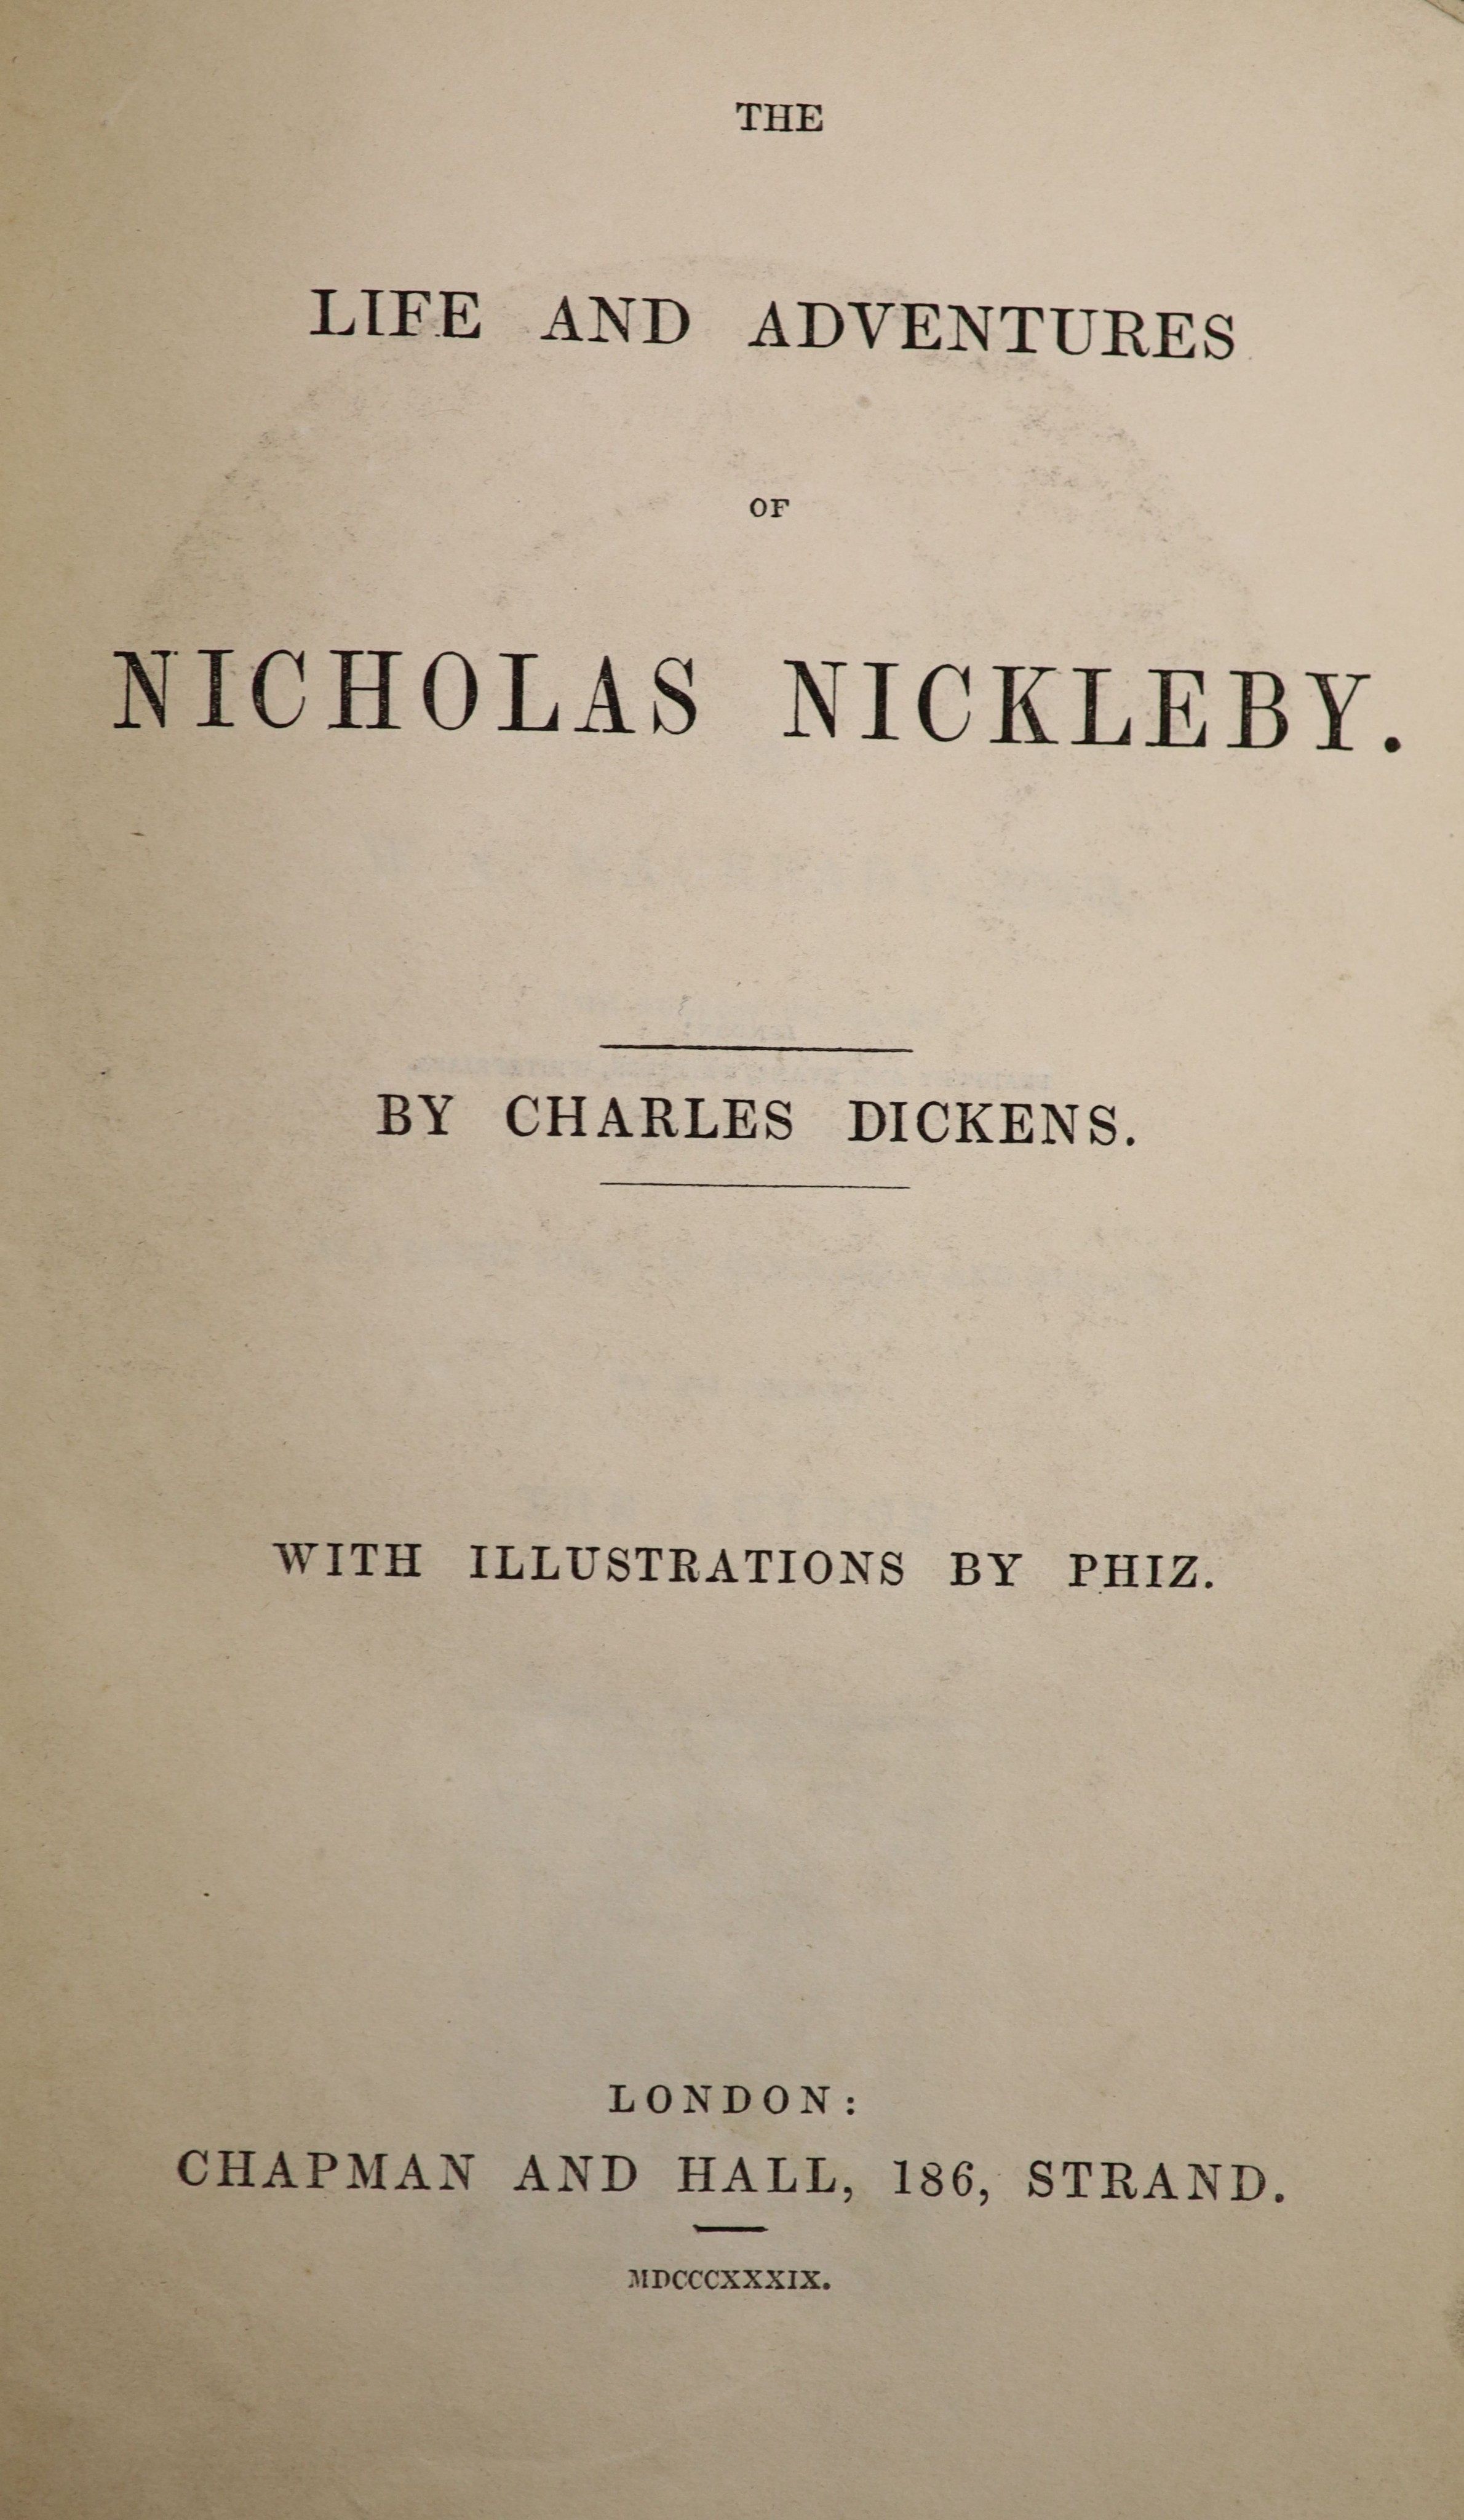 Dickens, Charles. Five Novels - first / early editions, viz, Bleak House, Dombey and Son, Nicholas Nickleby, Our Mutual Friend, Pickwick Papers, half leather bindings (Dombey binder's cloth), most plates present (but sta